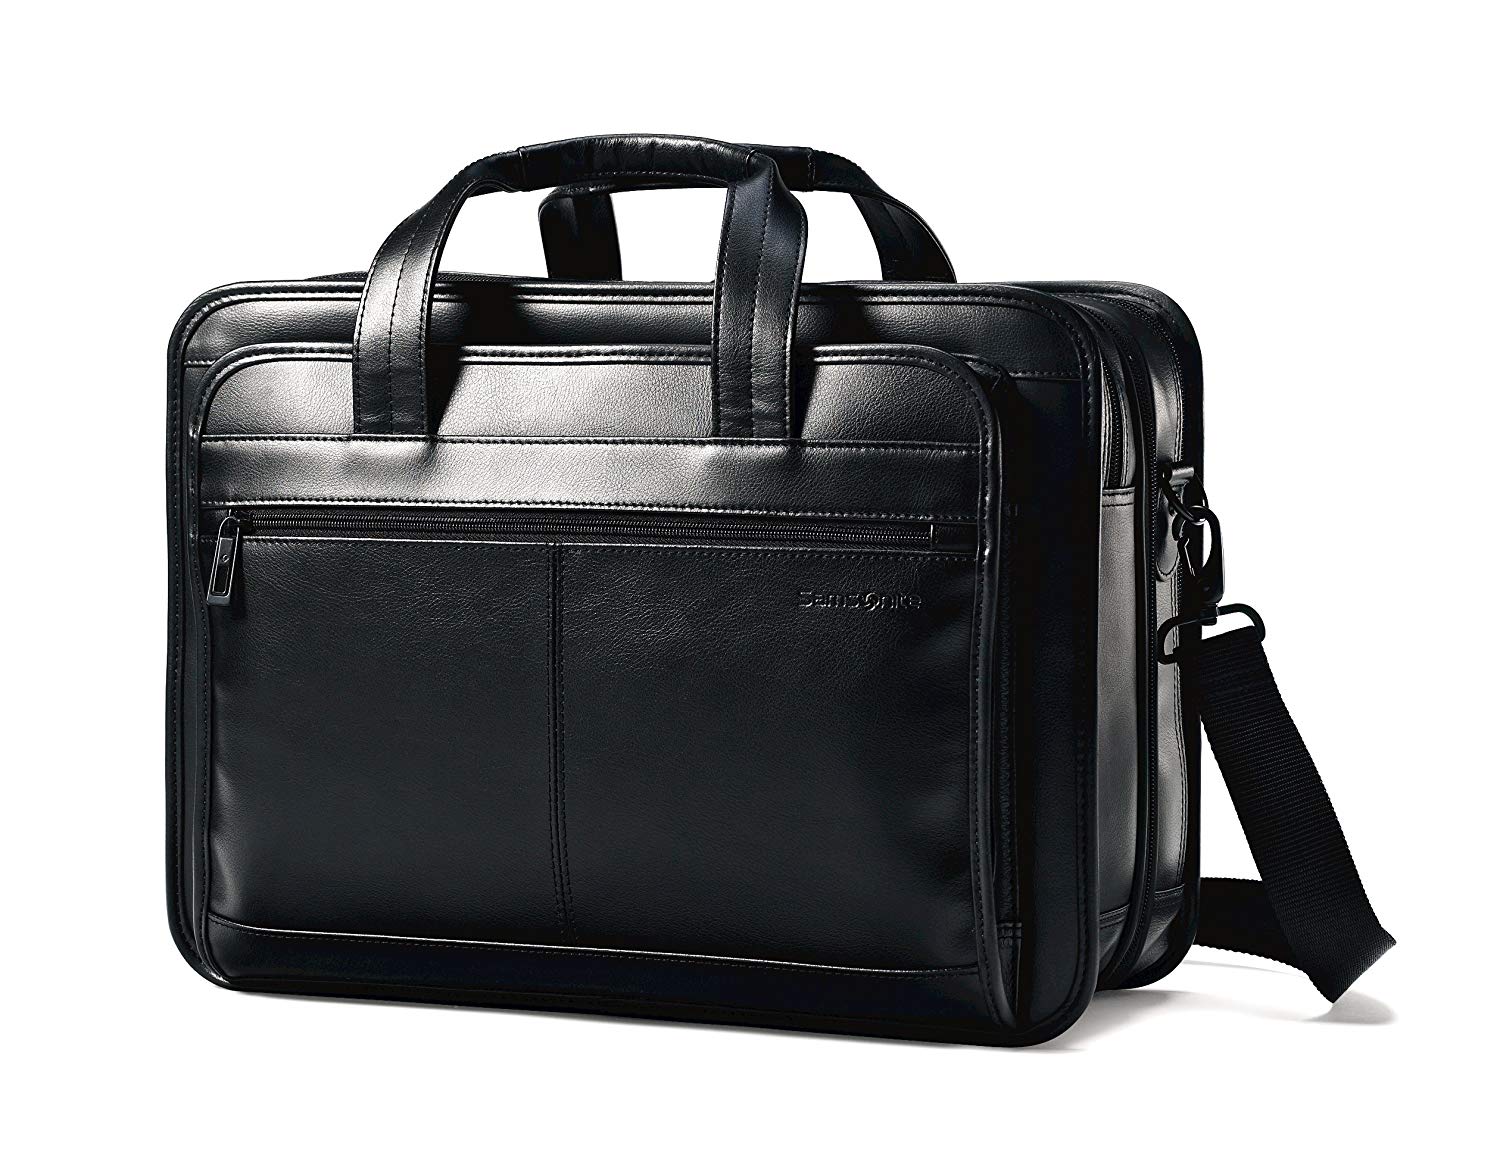 Top 10 Best Leather Briefcases in 2022 Reviews | Buyer's Guide